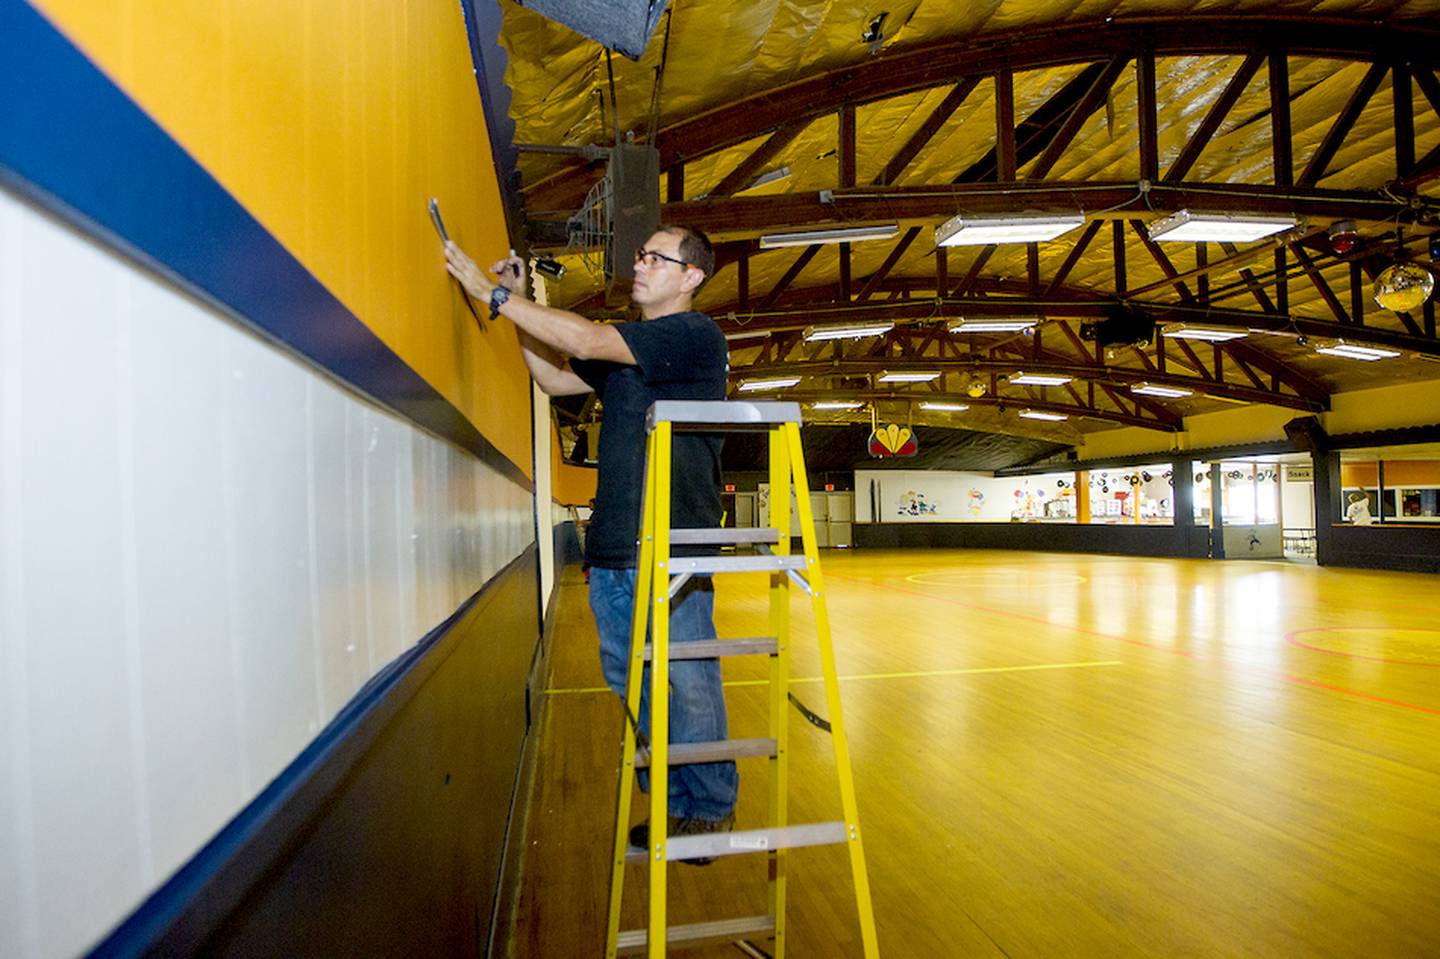 Rodolfo Cordova with Black Diamond works on installing a HVAC system at the Just For Fun Roller Rink in McHenry in this 2015 file photo. The roller rink closed its doors in the fall of 2020 and then burned down in what police say was an arson fire they allege was ignited by two teens in May. A Wisconsin-based company is considering pursuing redevelopment of the site and building affordable housing.